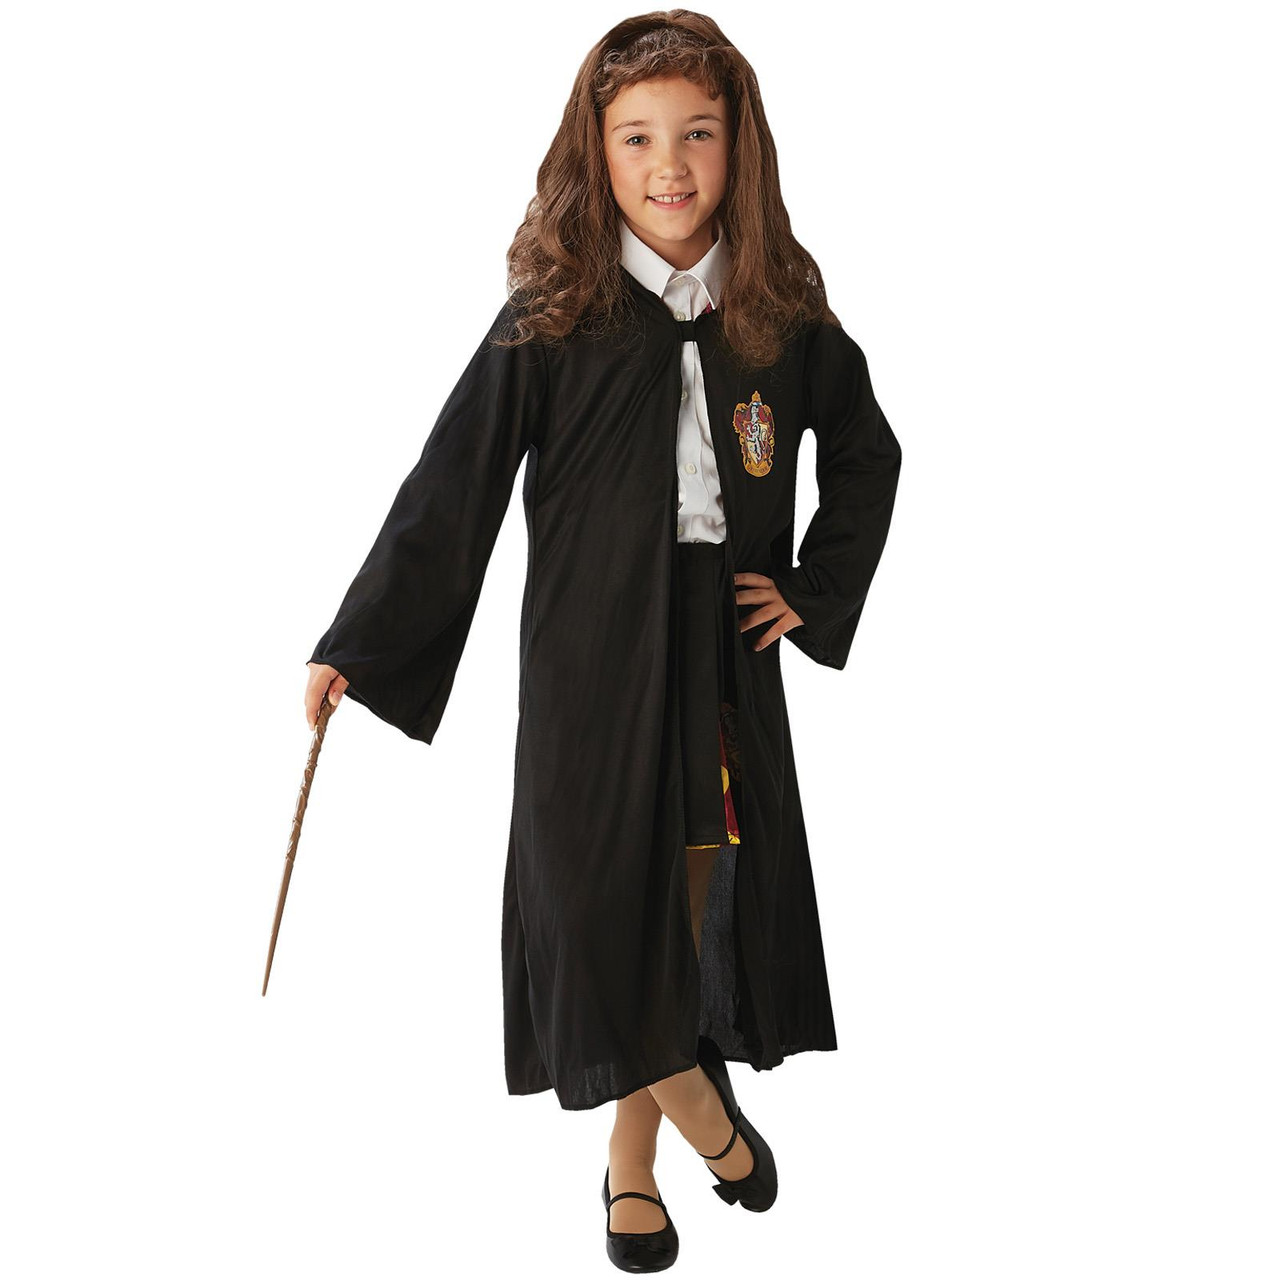 Girls Official Hermione Granger Costume Robe, Wig & Wand - Fancy Dress VIP